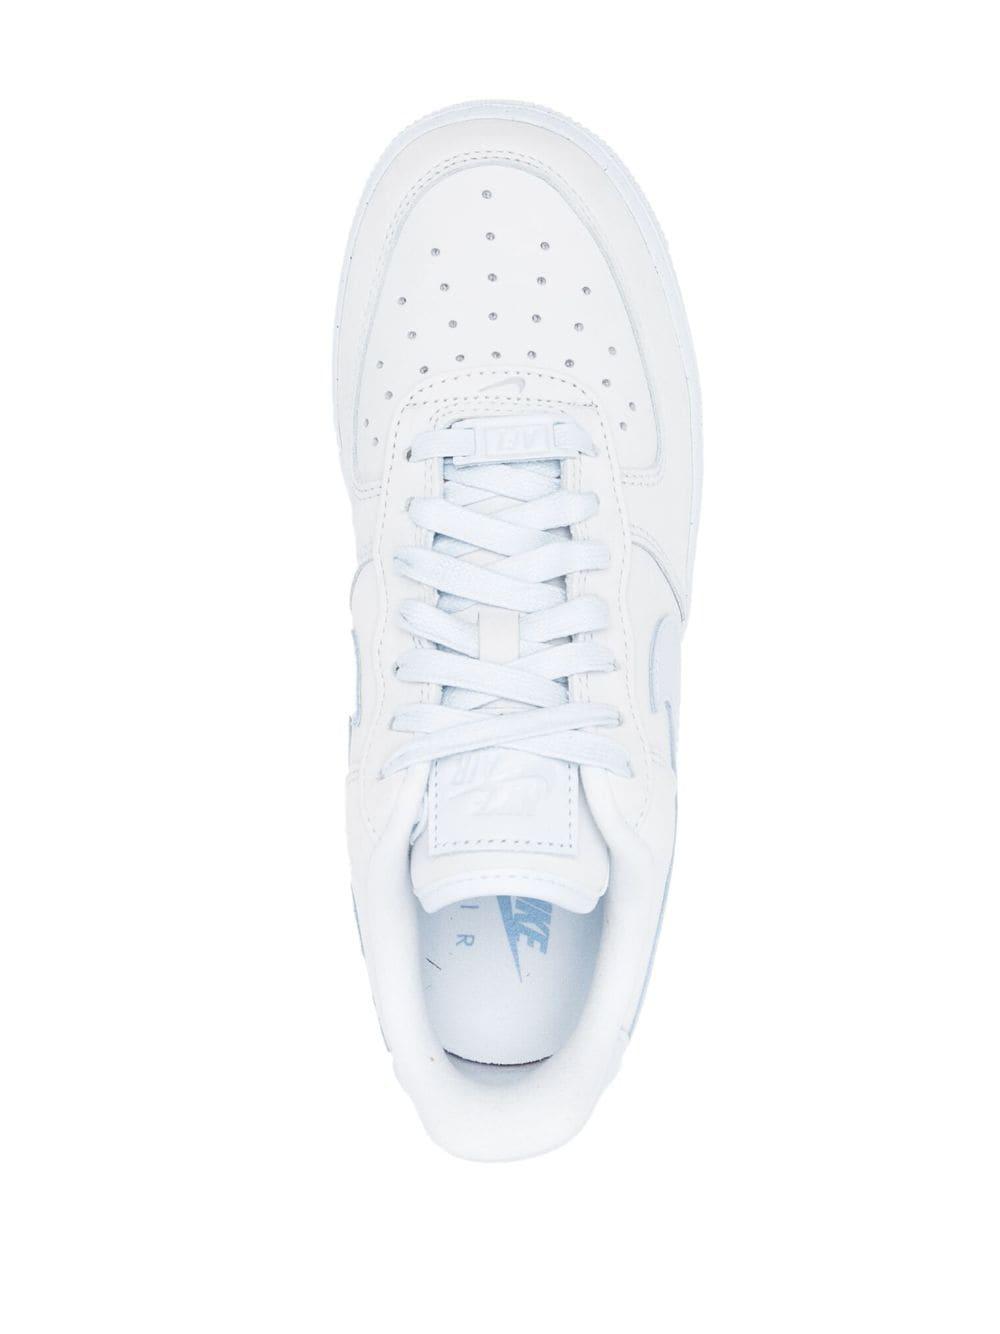 Nike Air Force 1' 07 Prm Leather Sneakers in White | Lyst